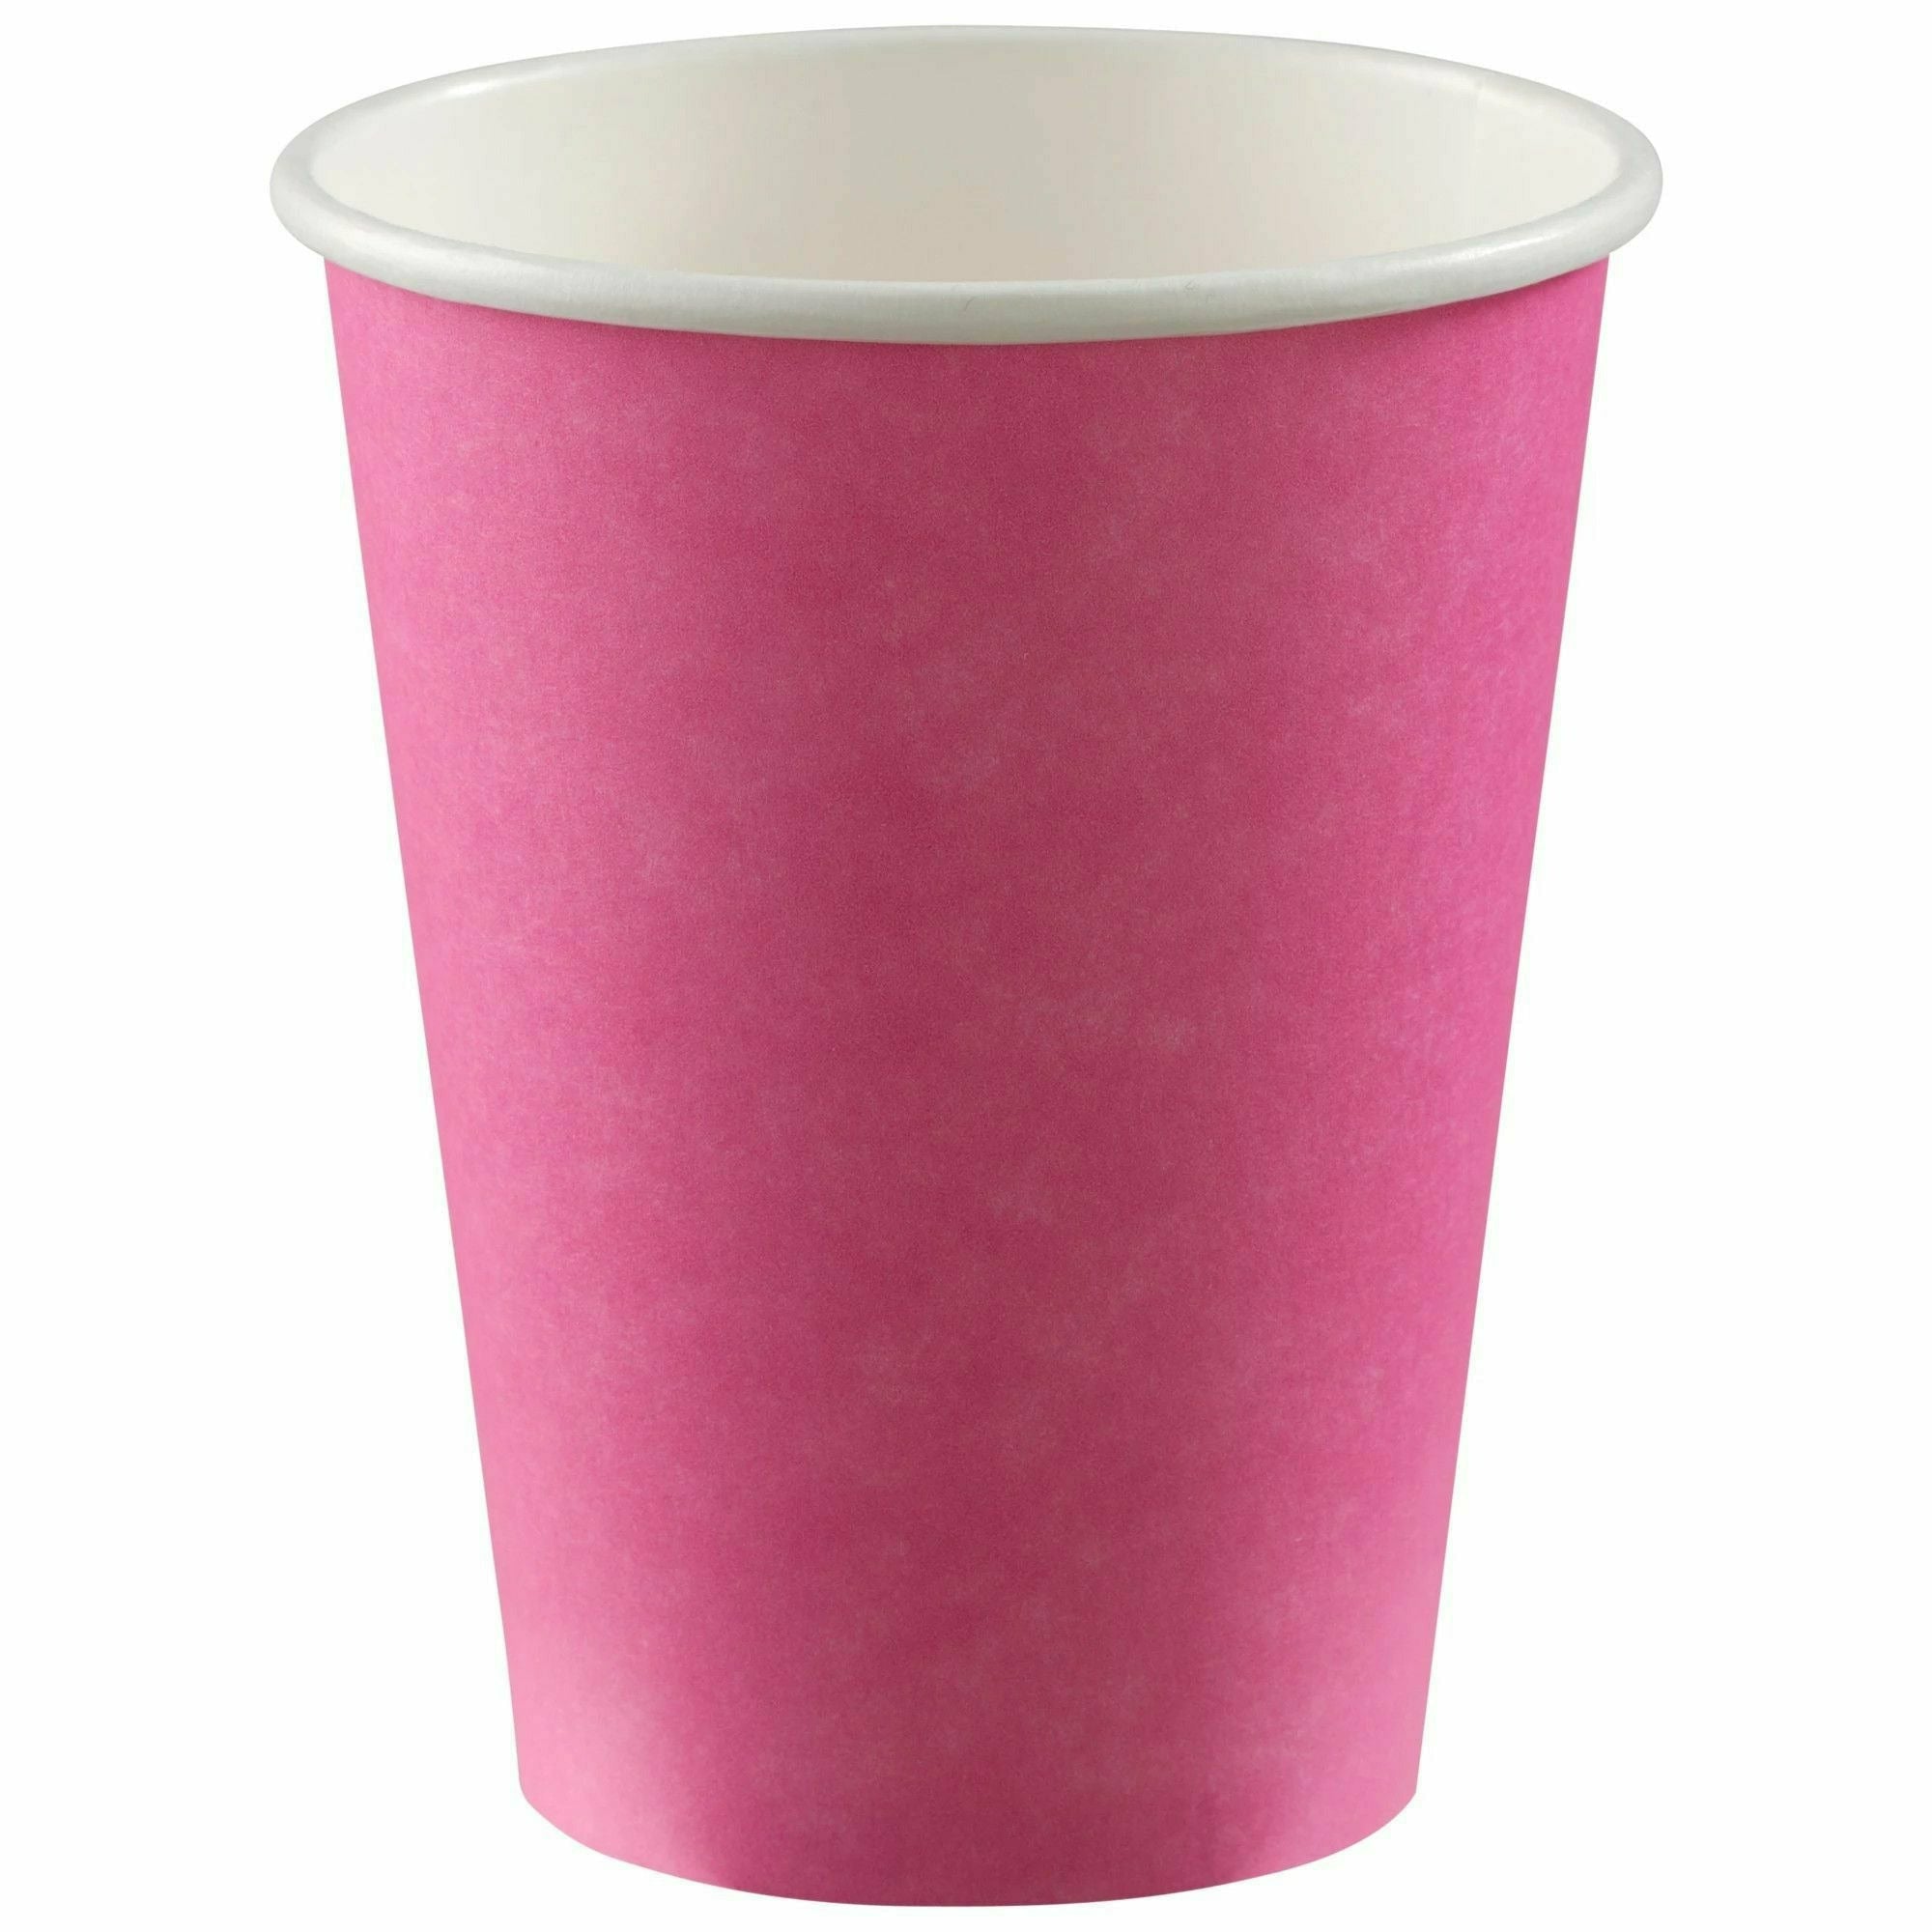 Amscan BASIC Bright Pink - 12 oz. Paper Cups, 50 Ct.